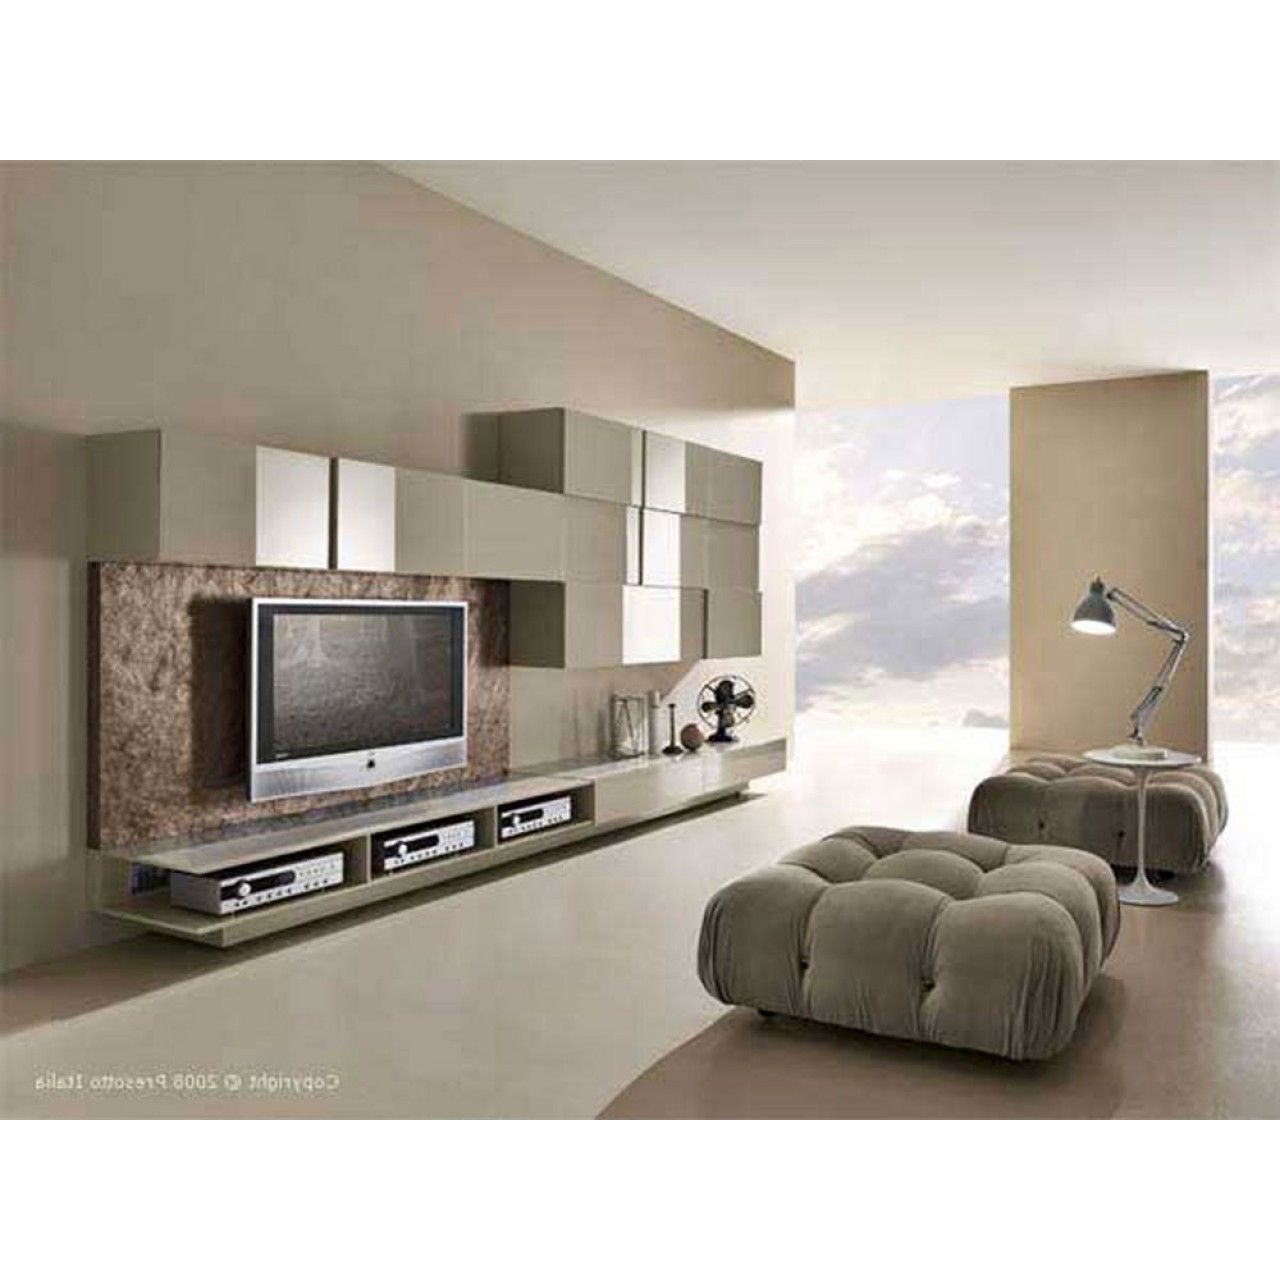 6 Tips For Selecting A New Tv Cabinet Designs For Hall Pertaining To Recent Contemporary Tv Cabinets (View 10 of 20)